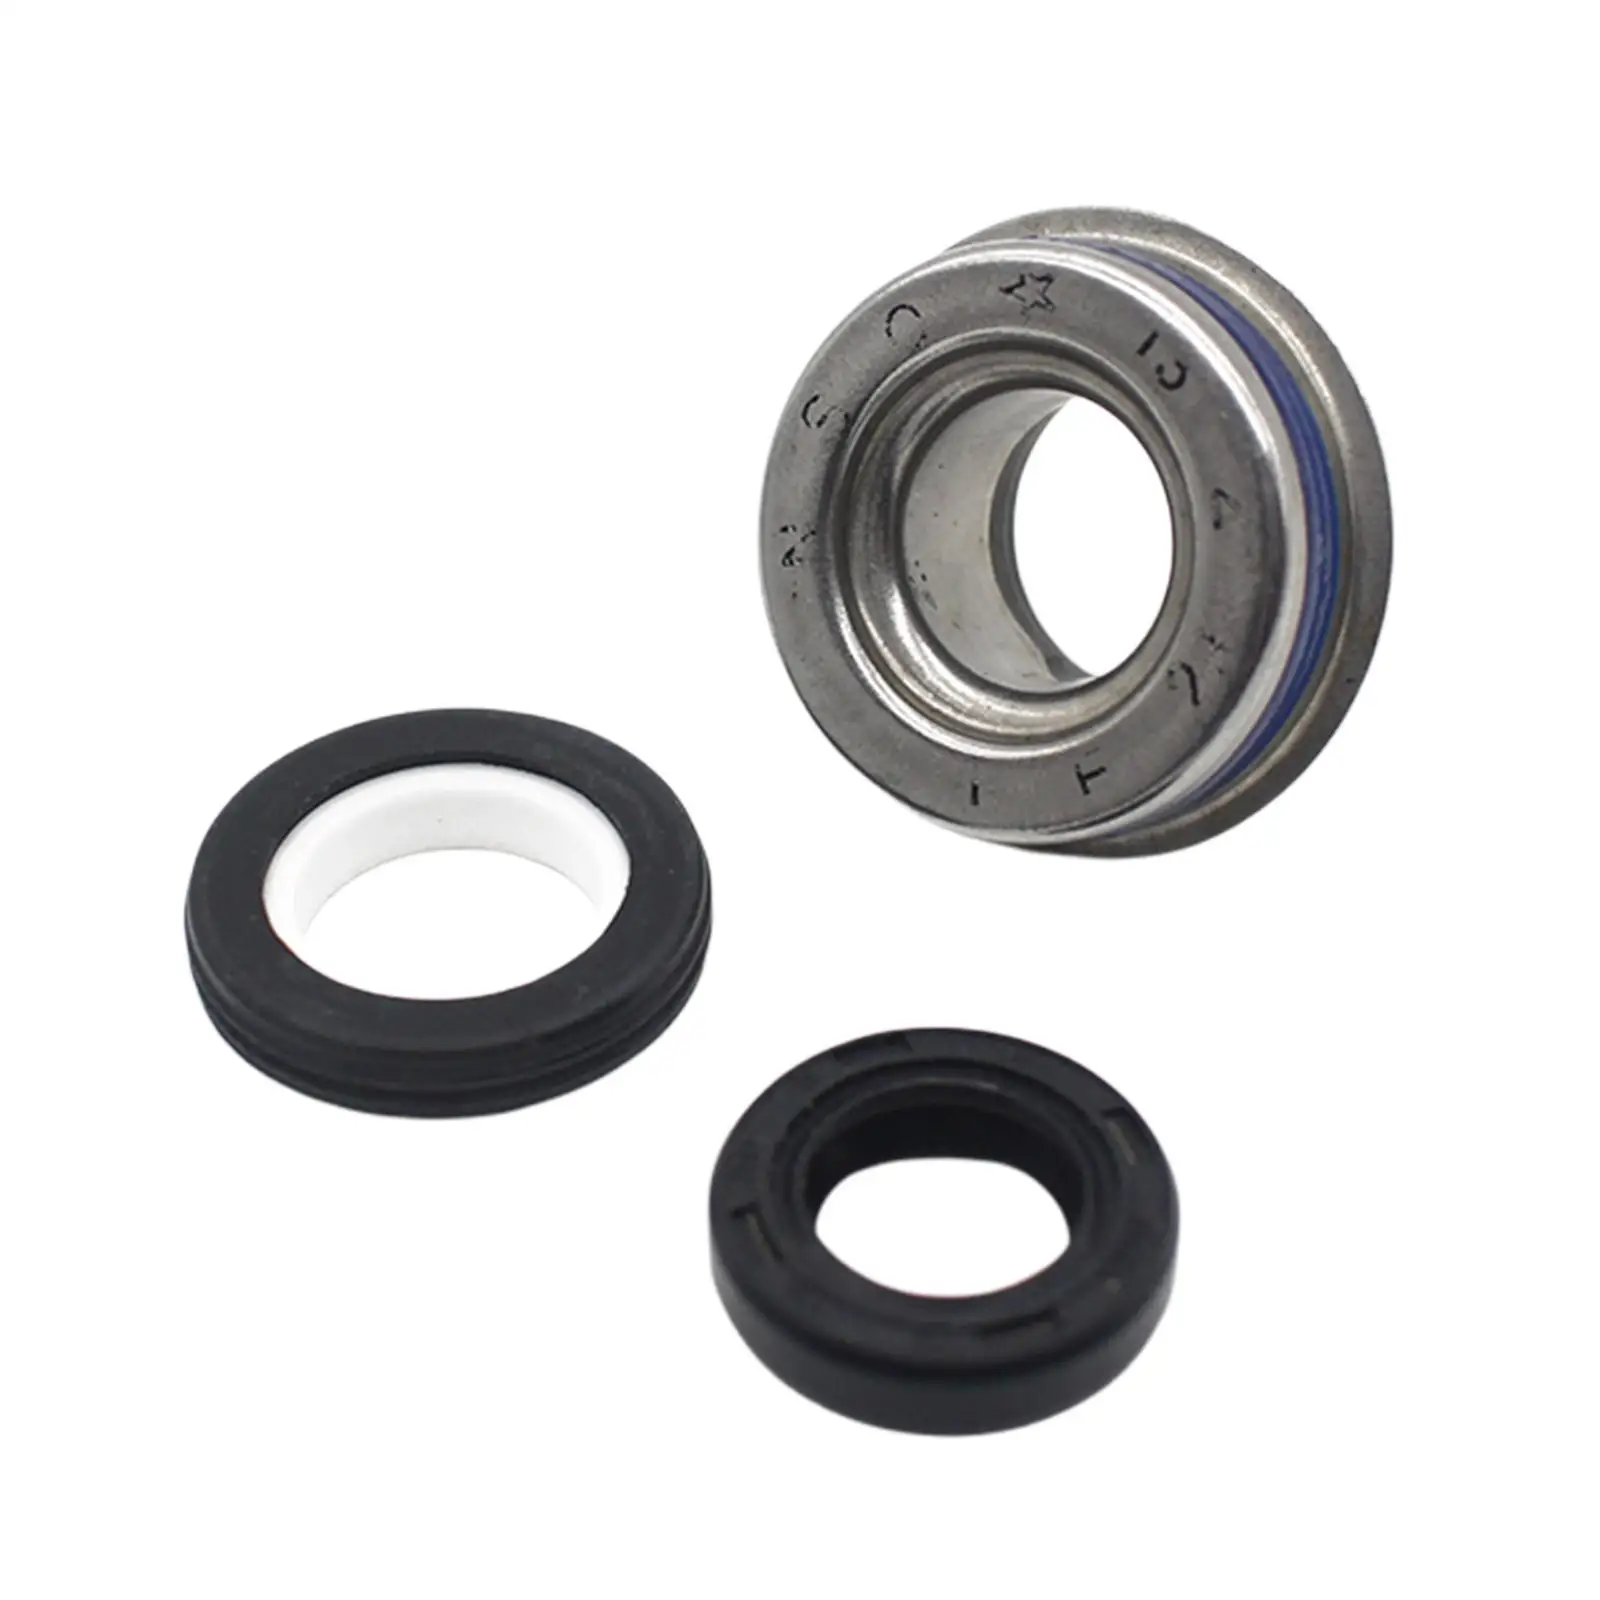 Motorbike Water Pump Mechanical Seal Kit for TM Max500 XP500 Yy-Yl-Zs 2009-2010